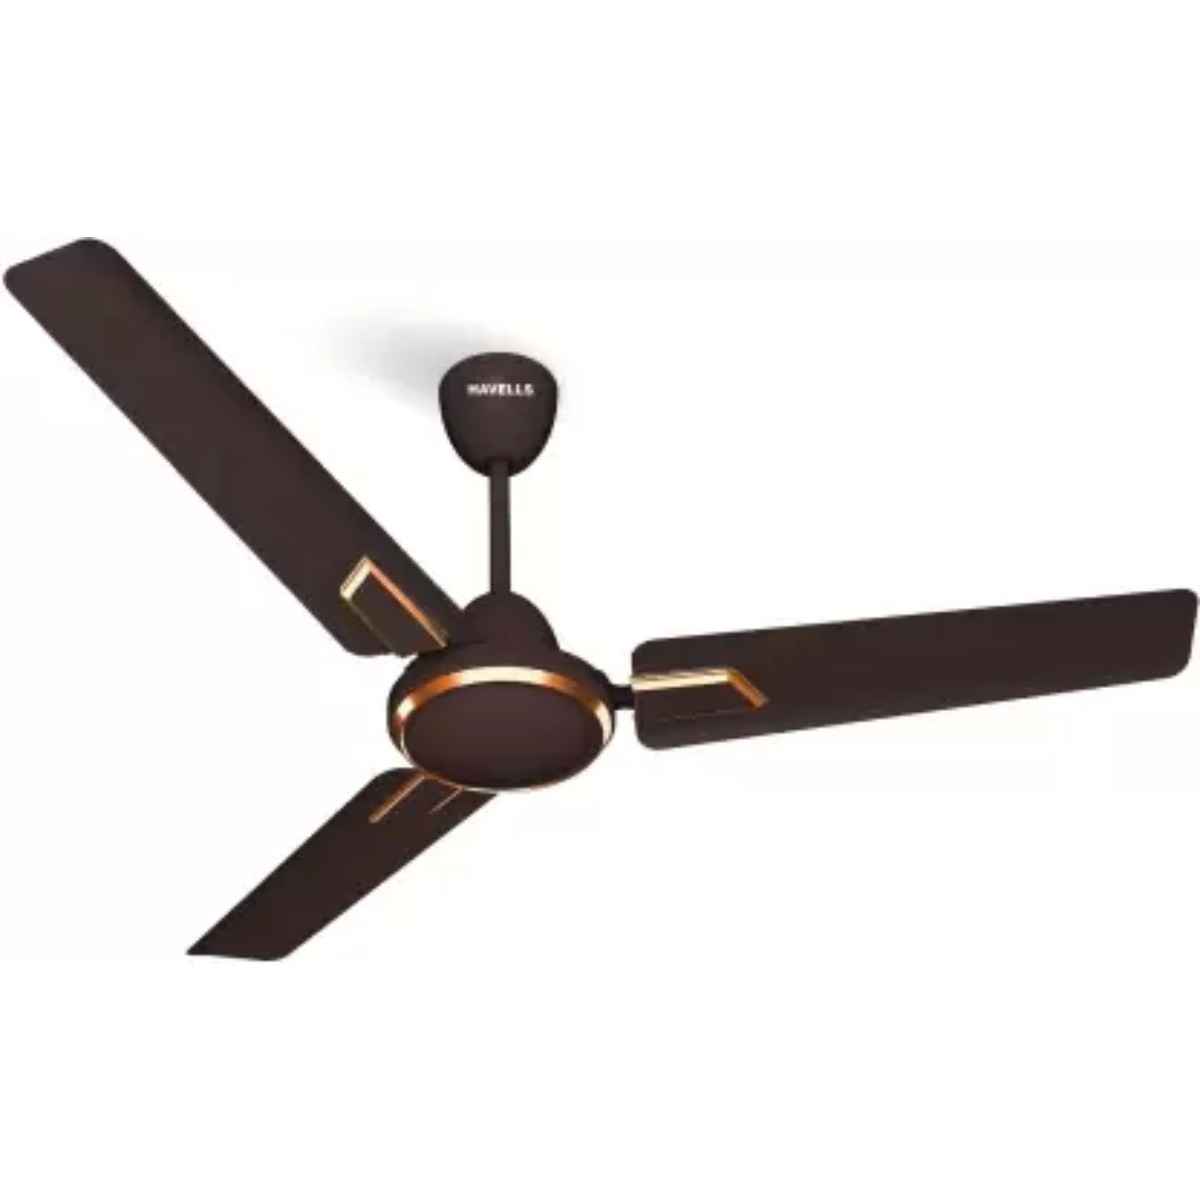 HAVELLS ANDRIA Ceiling Fan